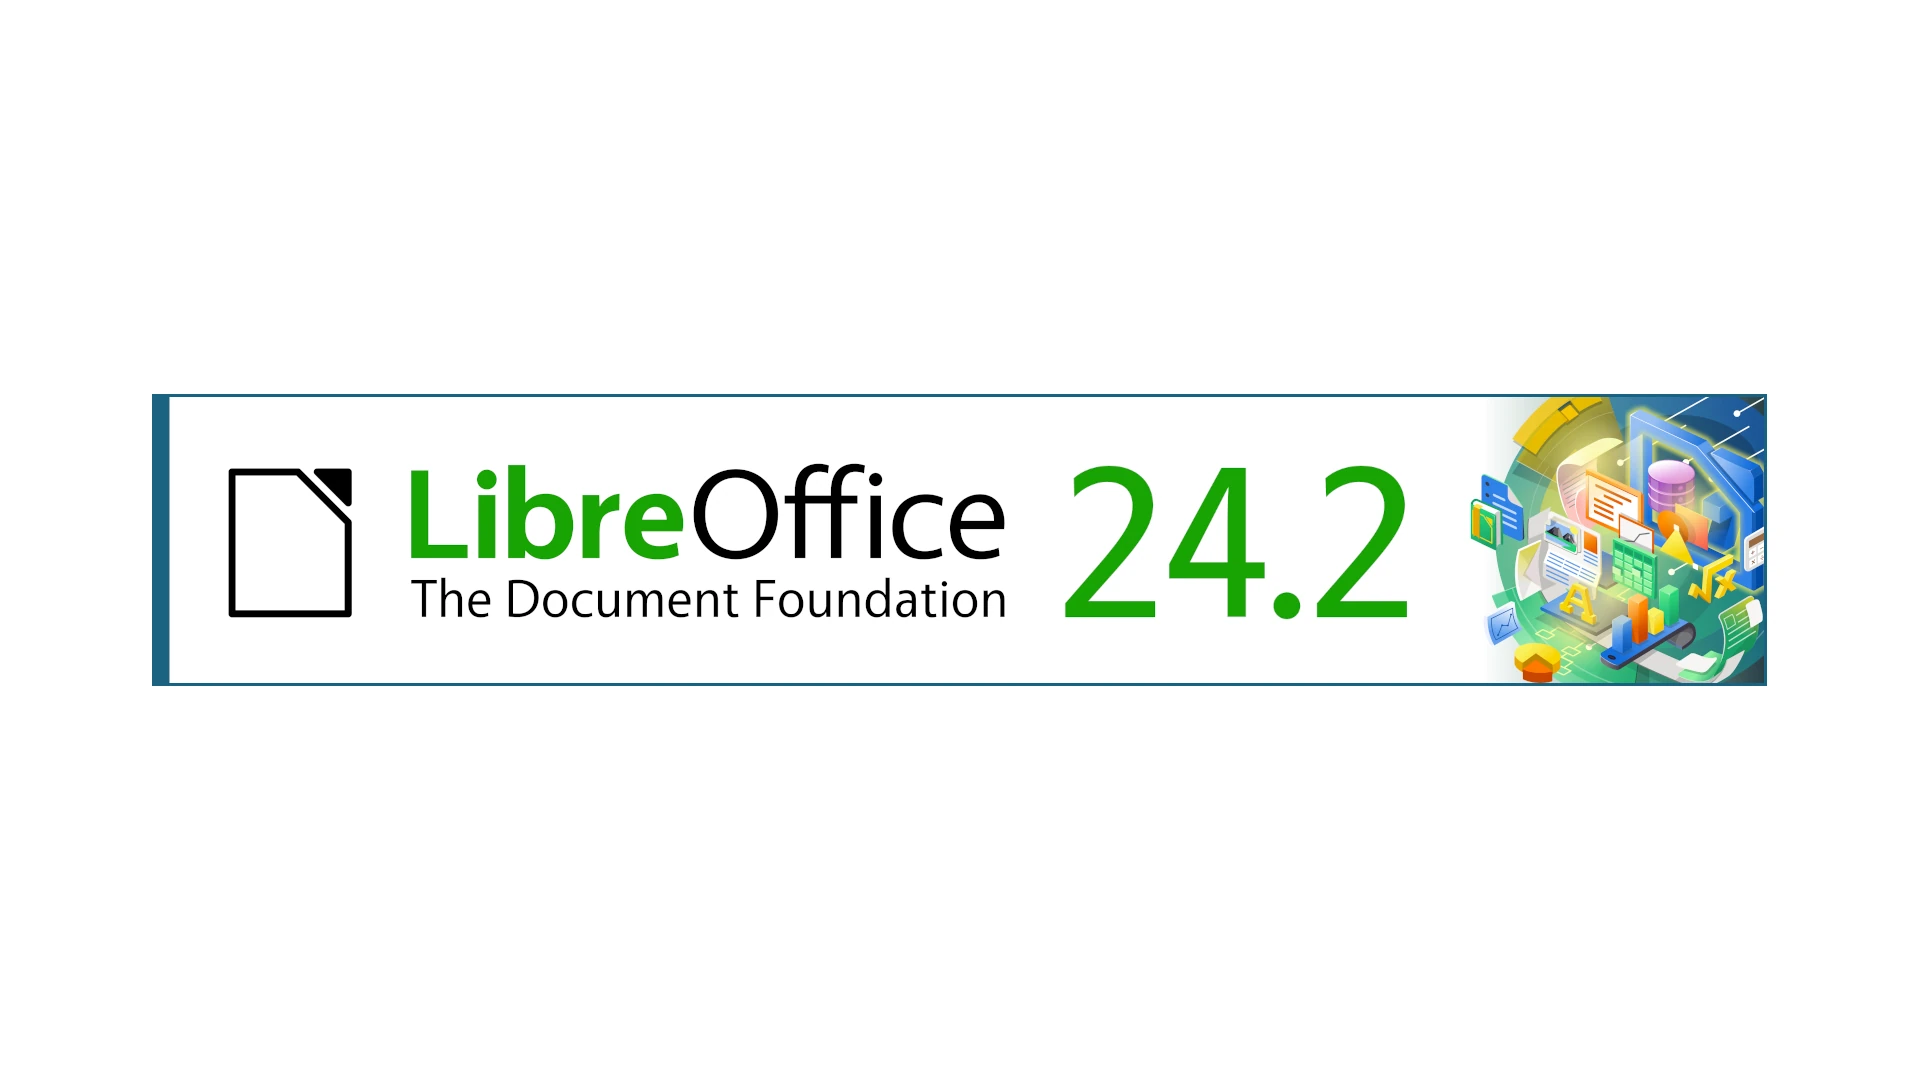 LibreOffice 24.2 Open-Source Office Suite Officially Released, Here’s What’s New